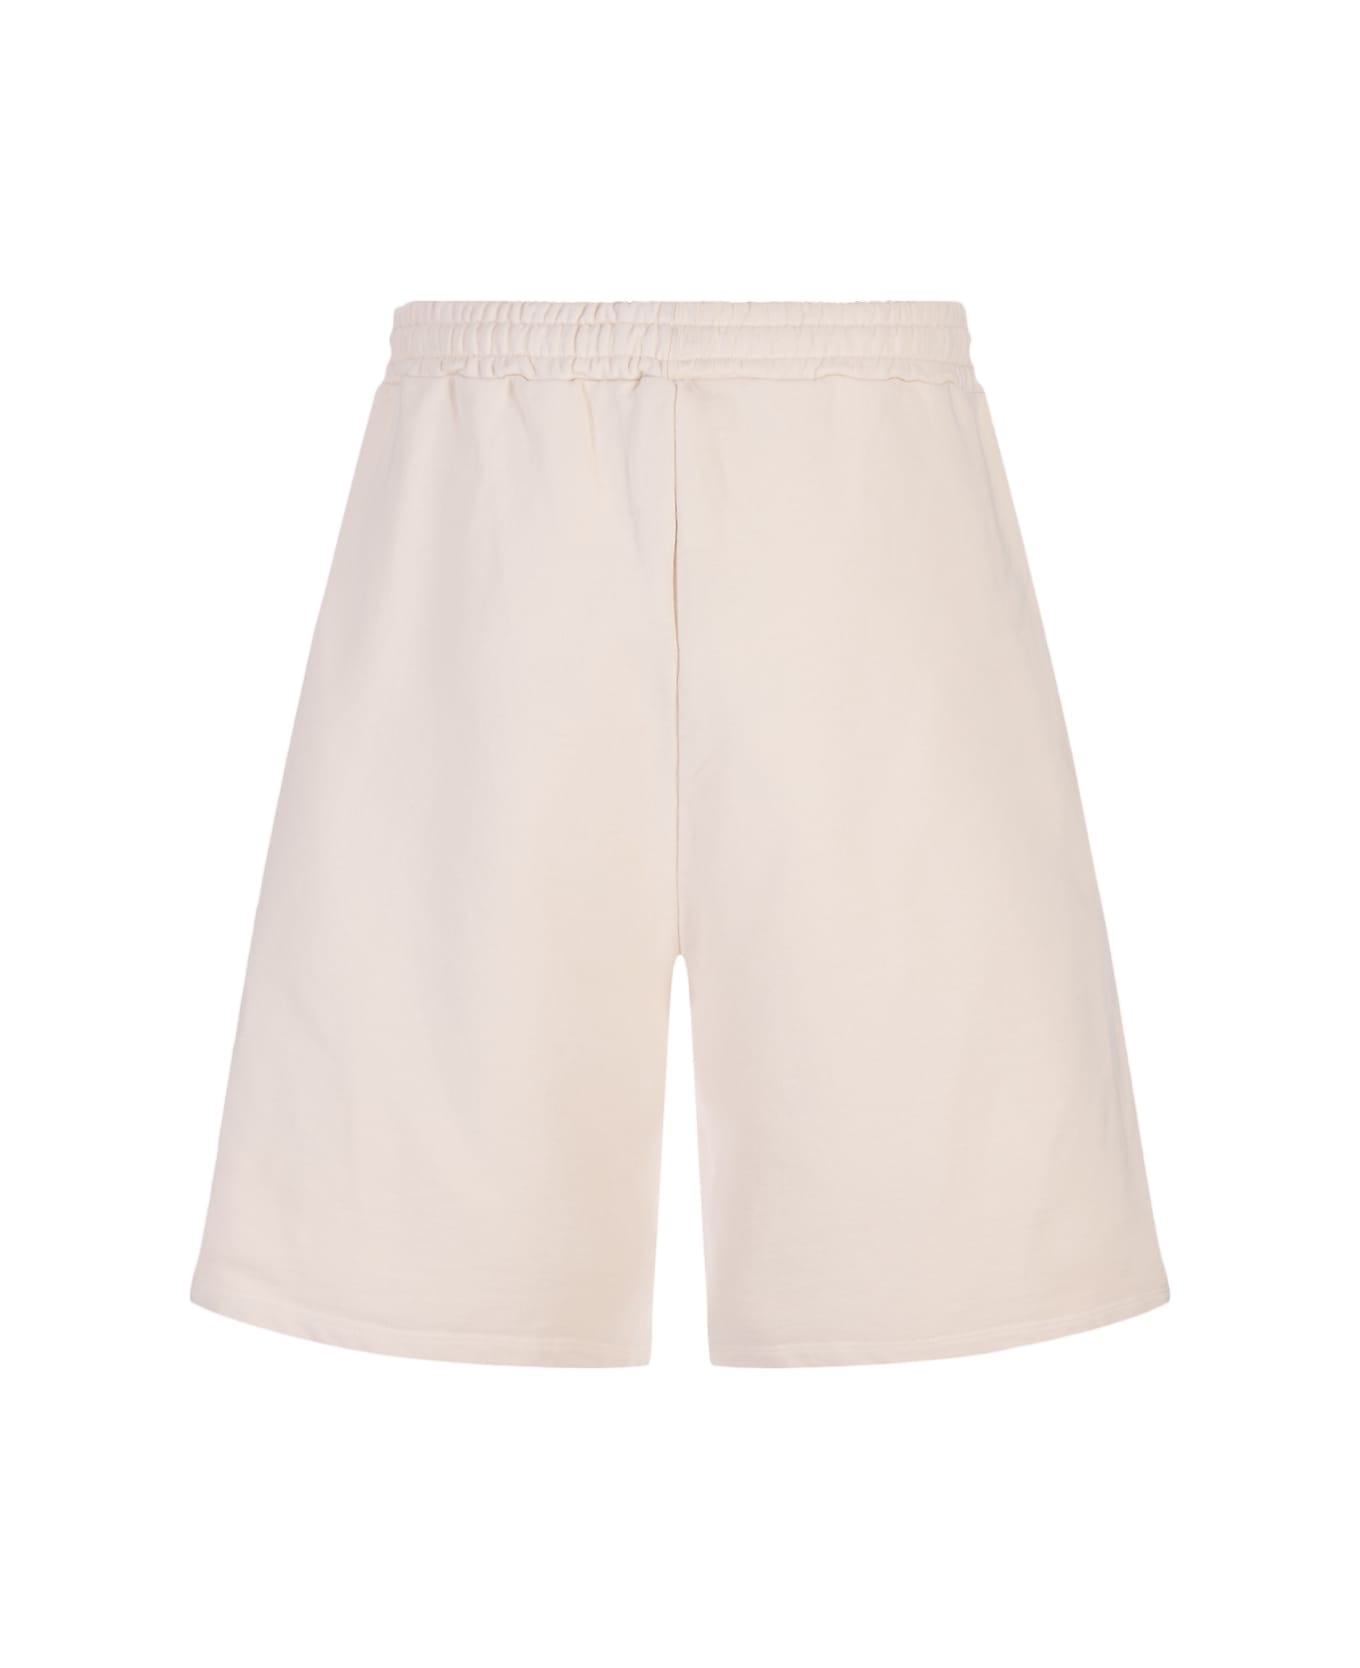 Barrow Taupe Bermuda Shorts With Lettering Prints. - Brown